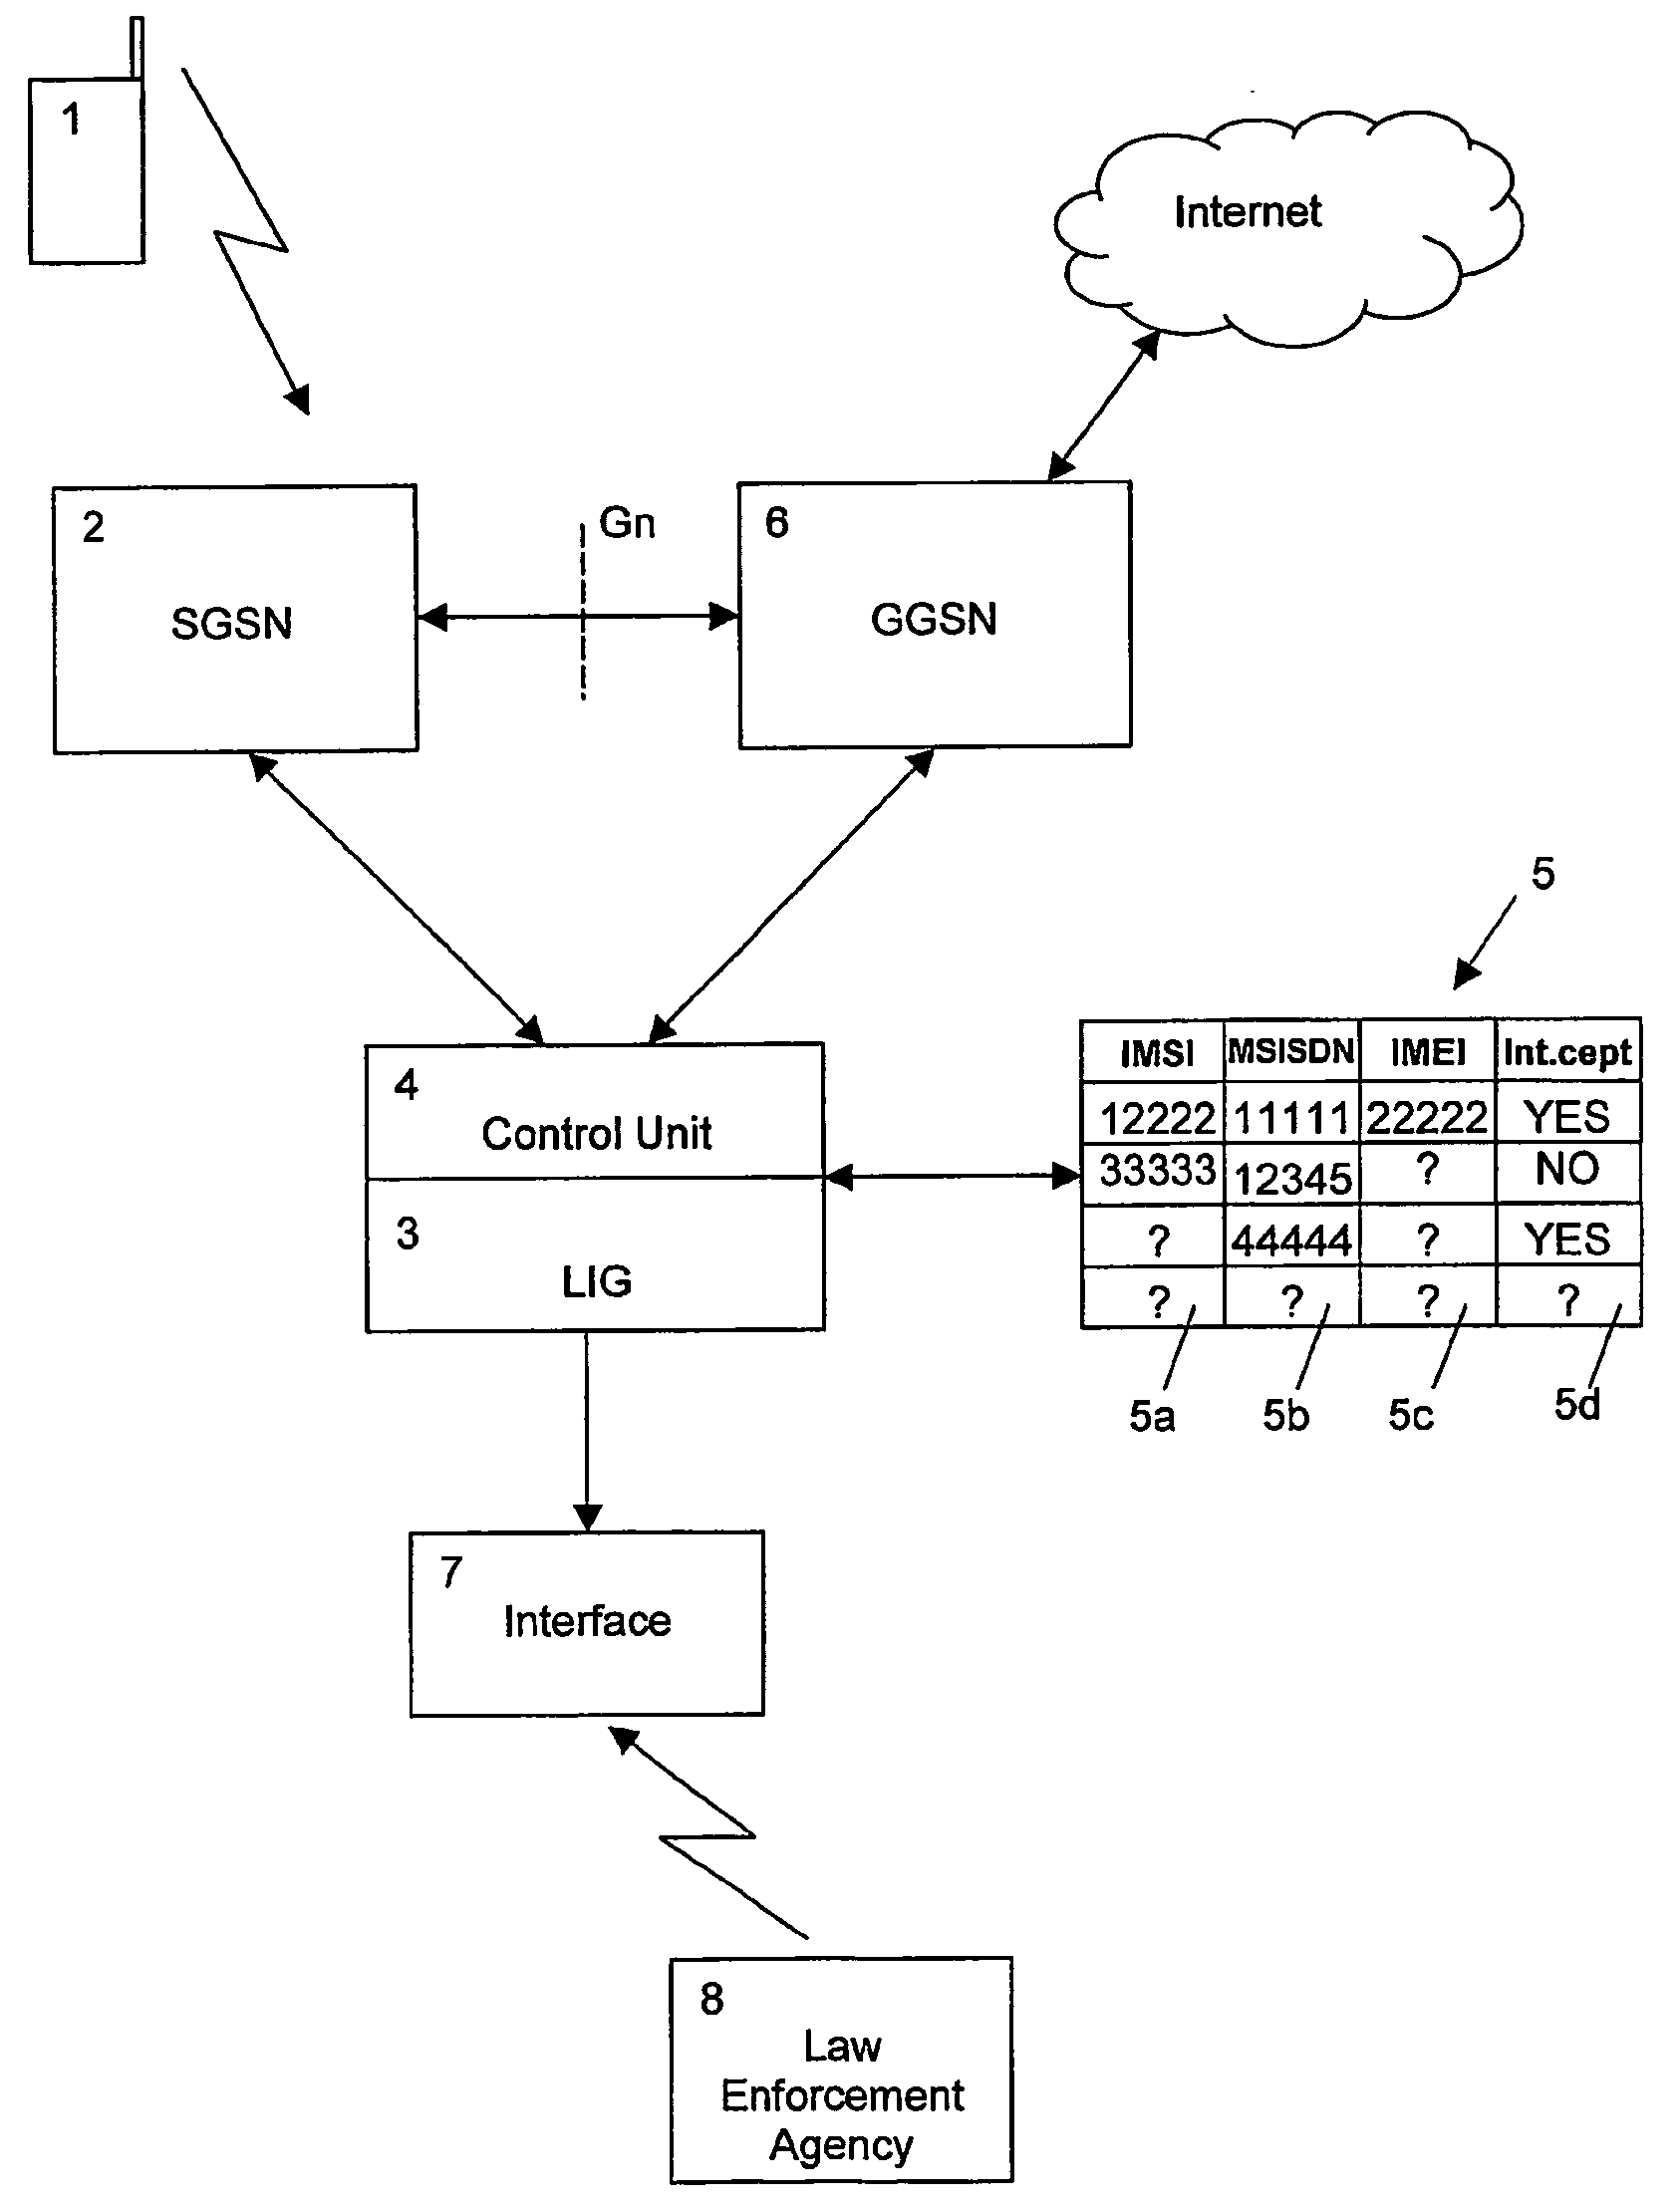 Infection-based monitoring of a party in a communication network